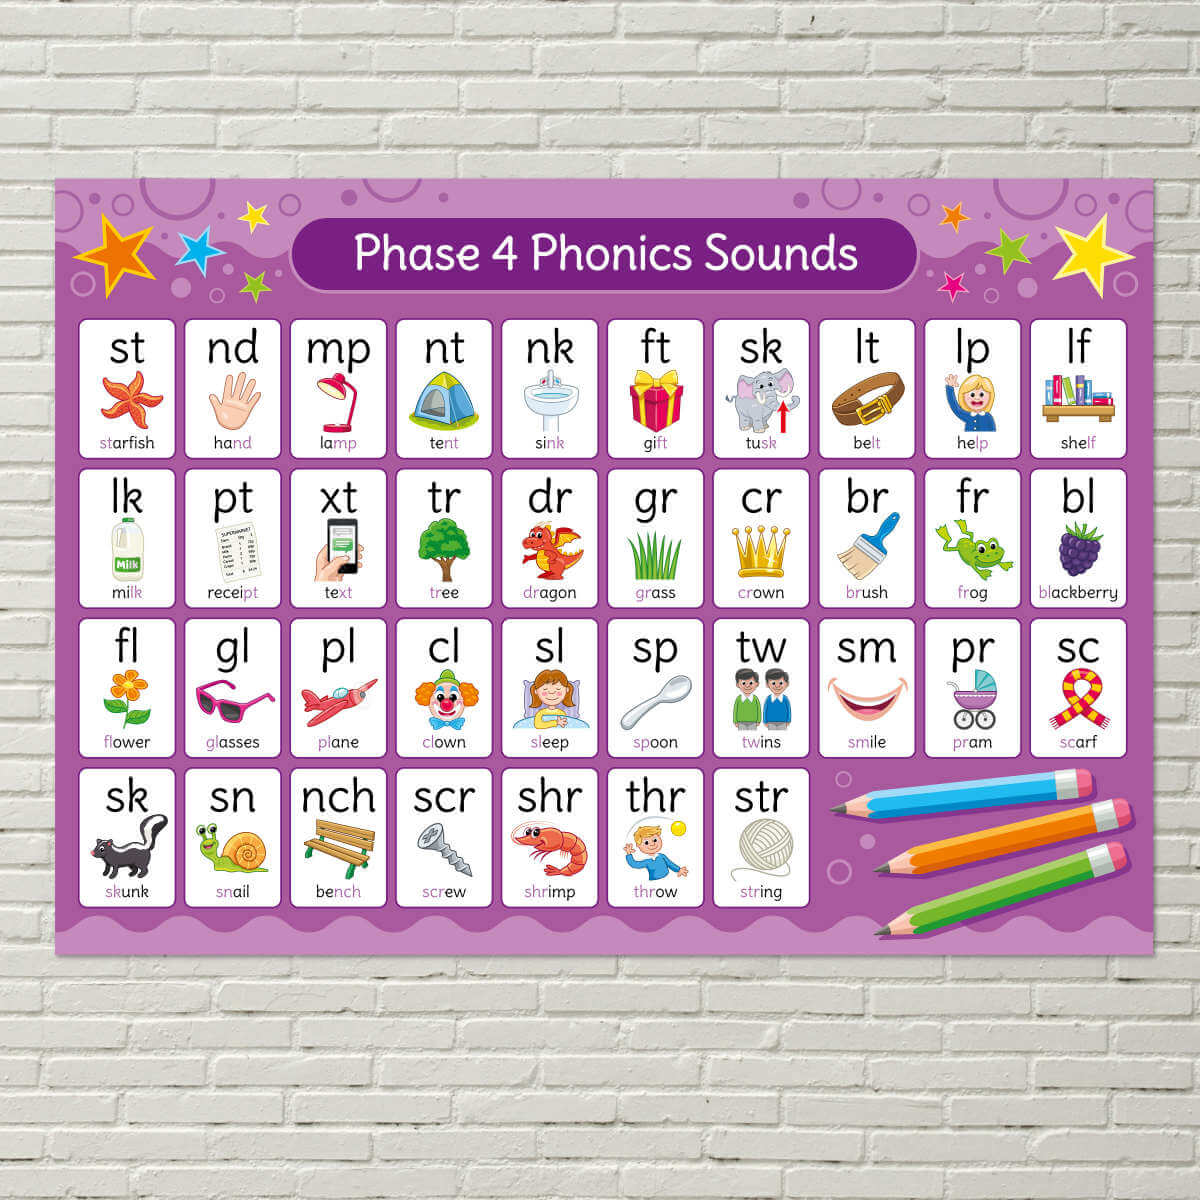 phonics-phase-4-sounds-poster-english-poster-for-schools